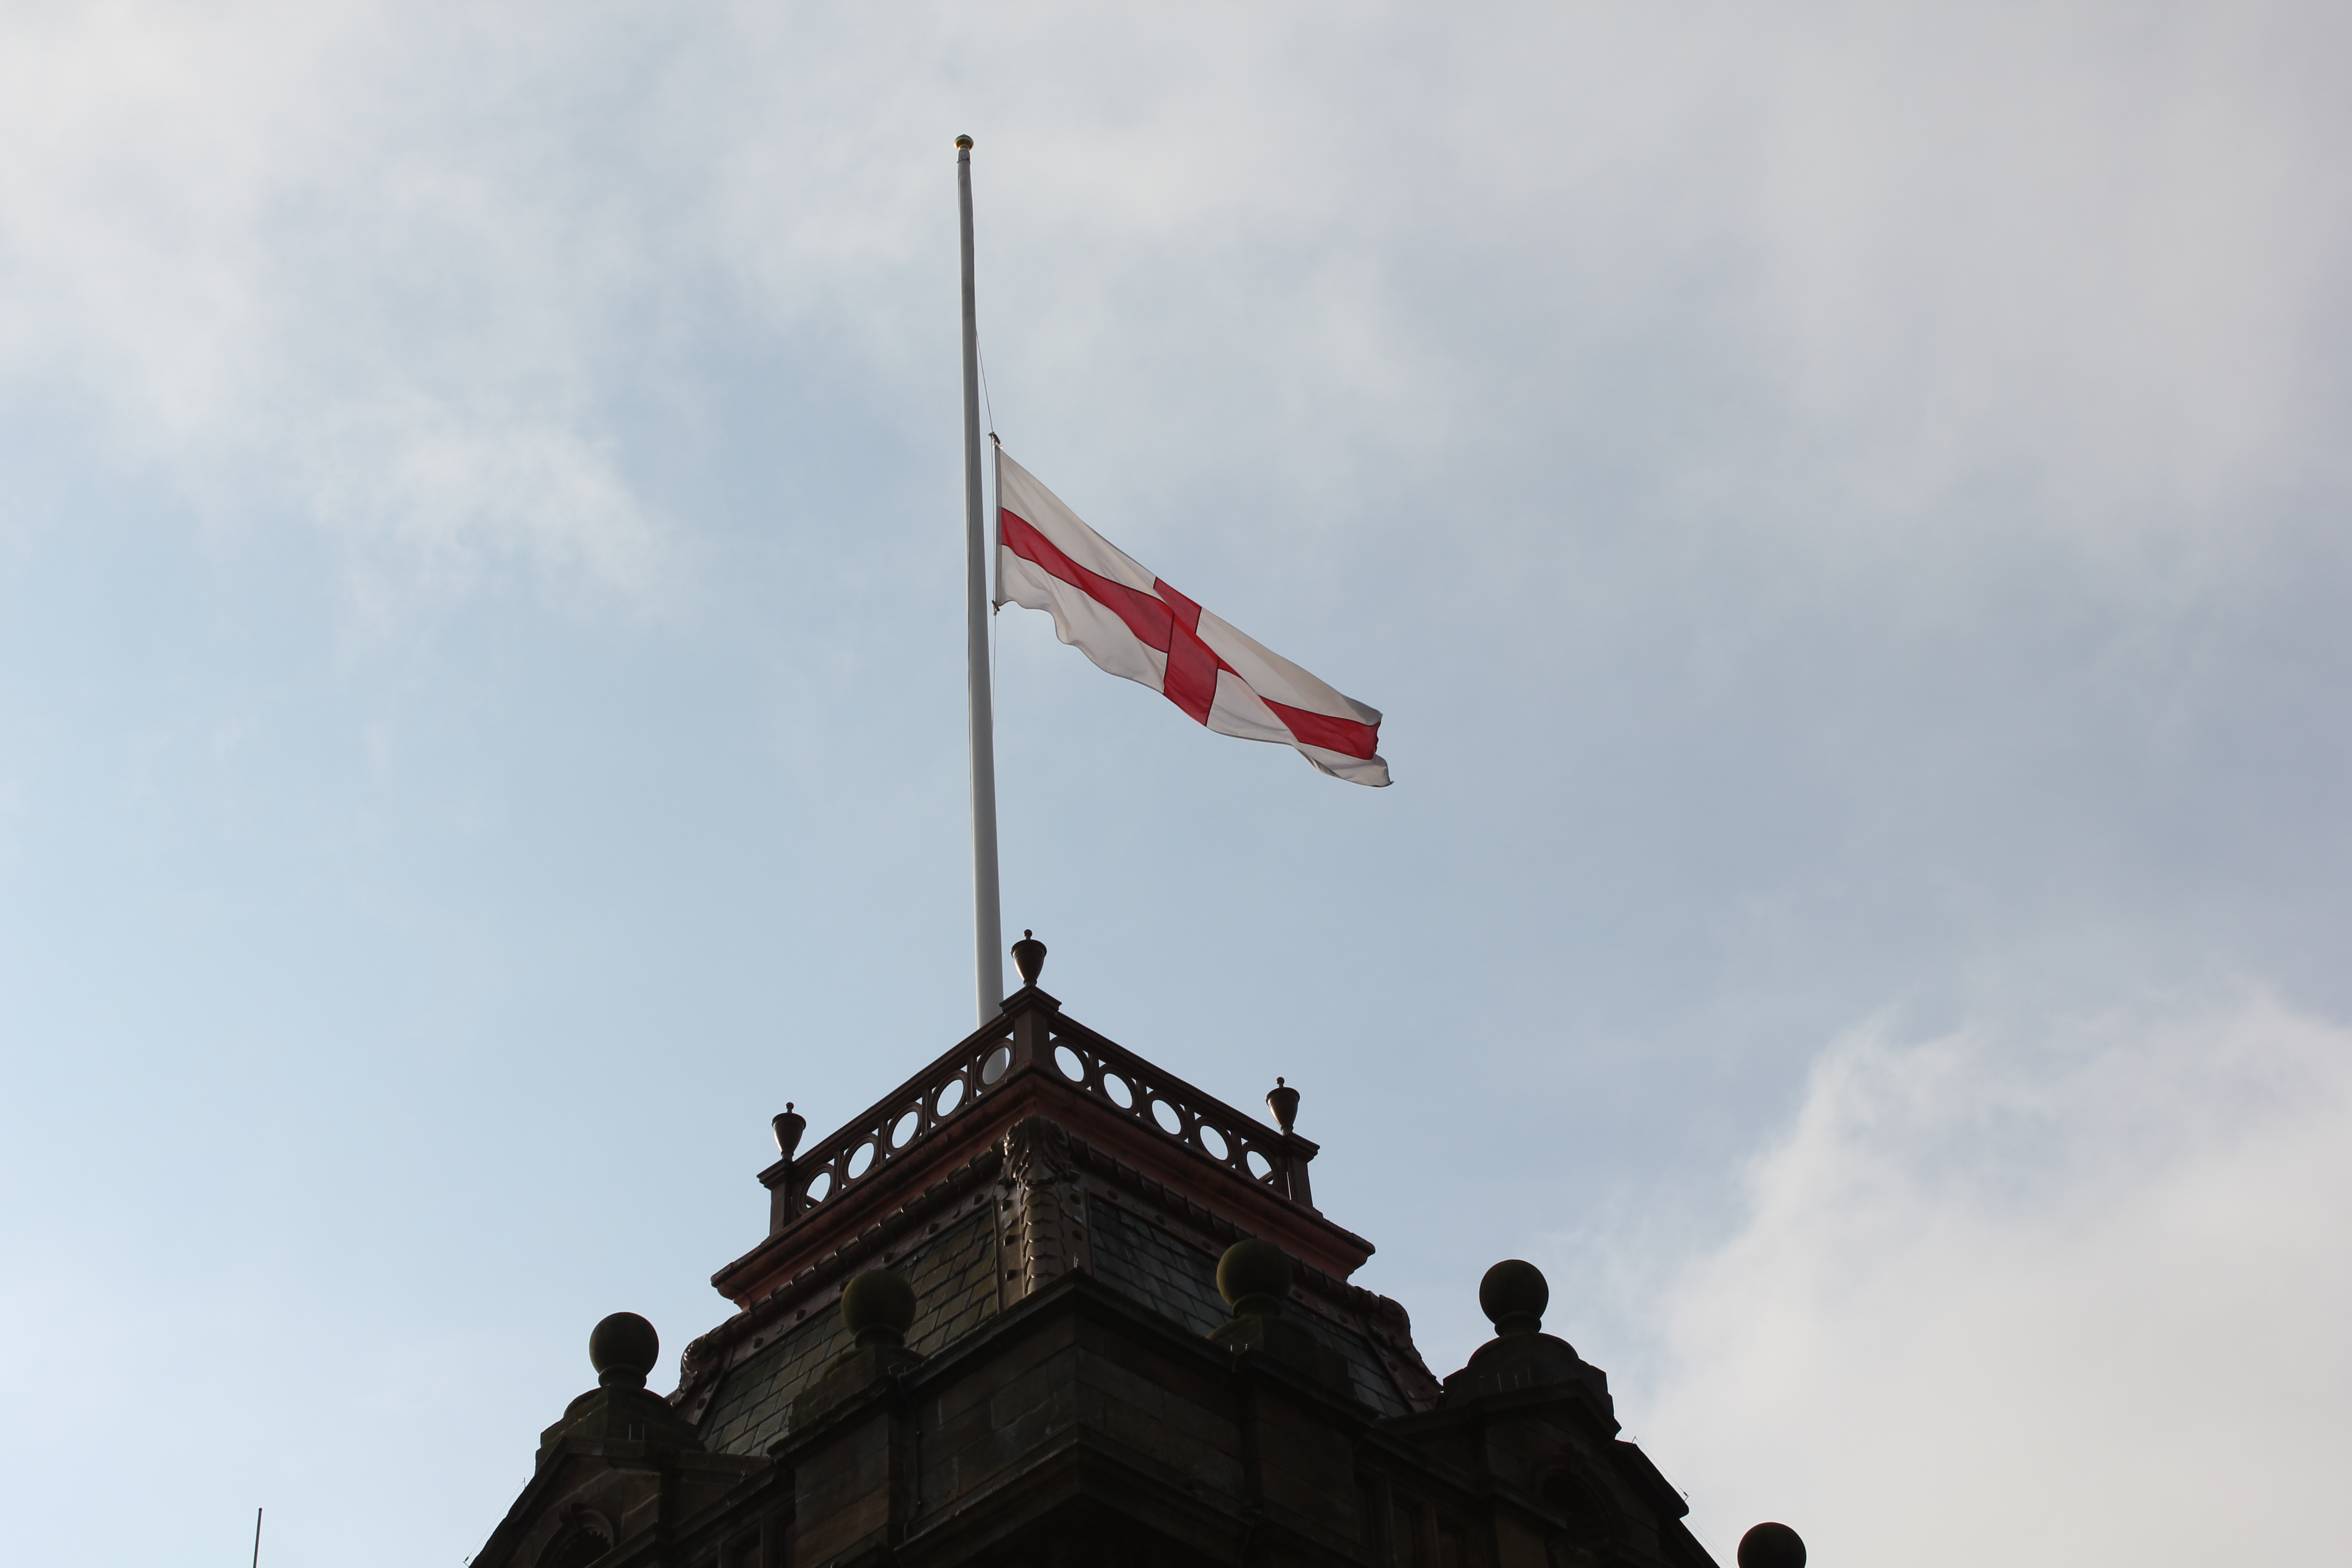 Statement on flag flying at half mast following terrorist attack in Manchester